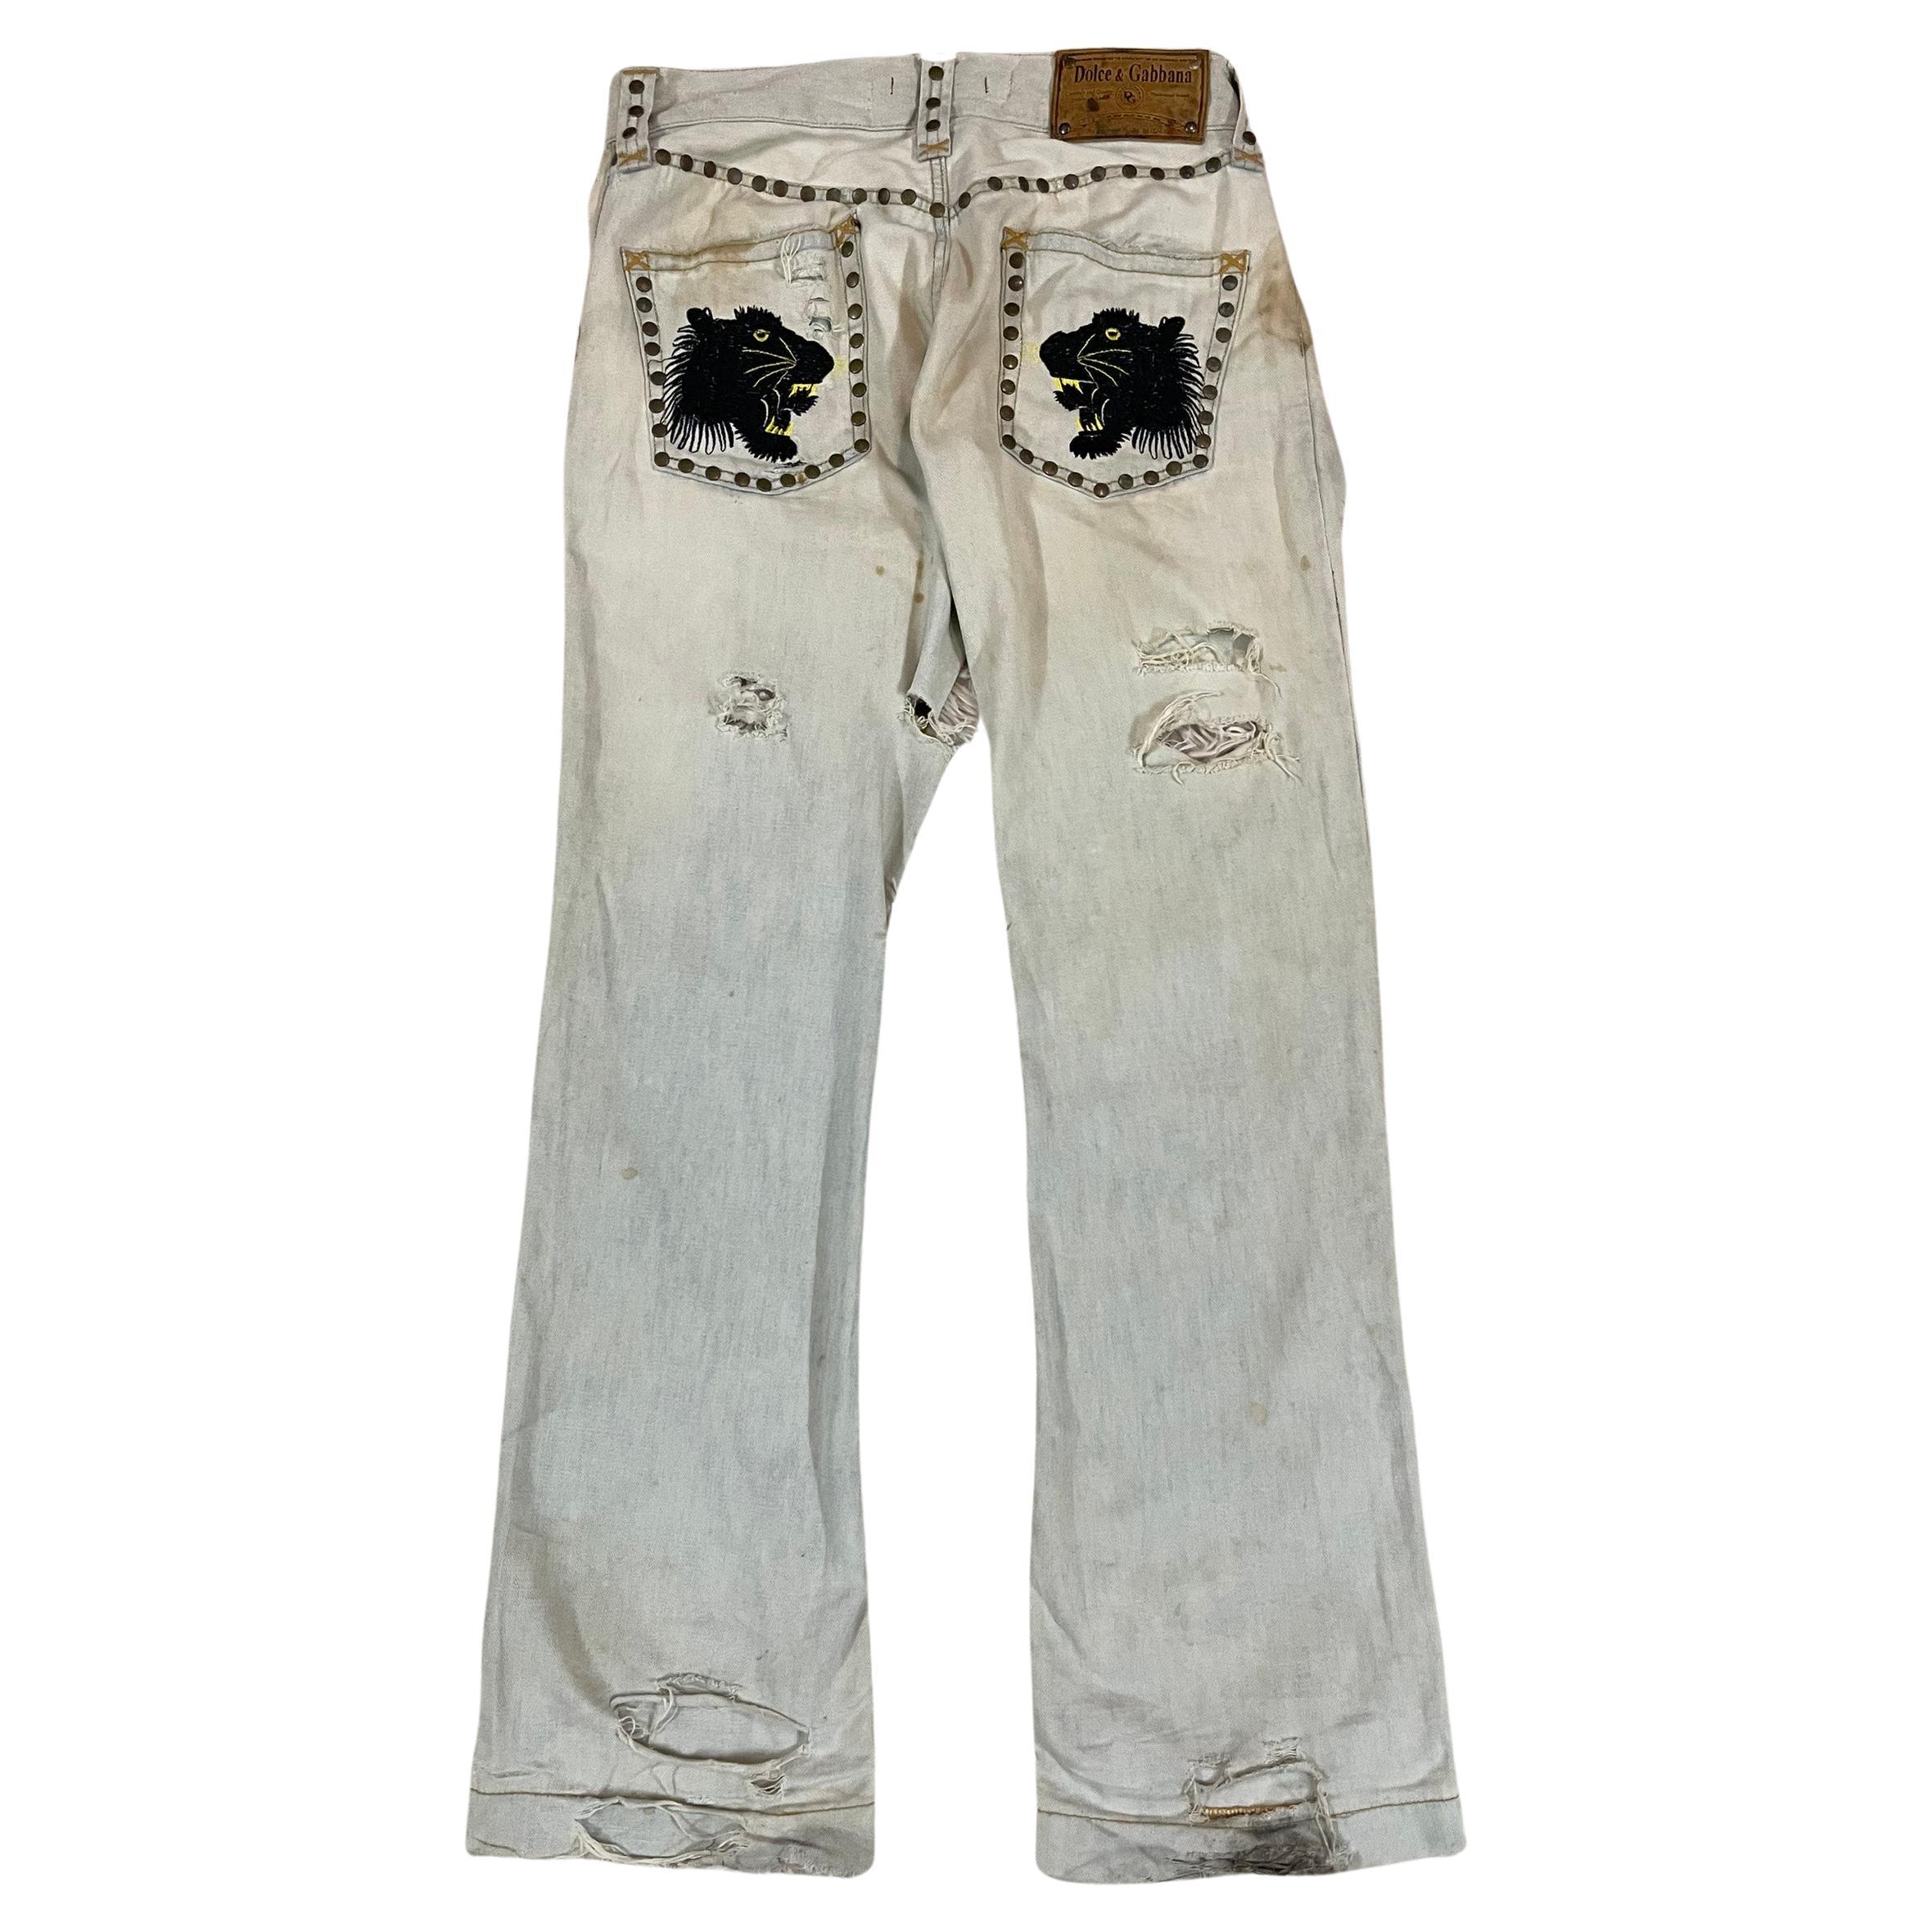 Dolce Gabbana S/S2006 Worn and Distressed Leopard Jeans